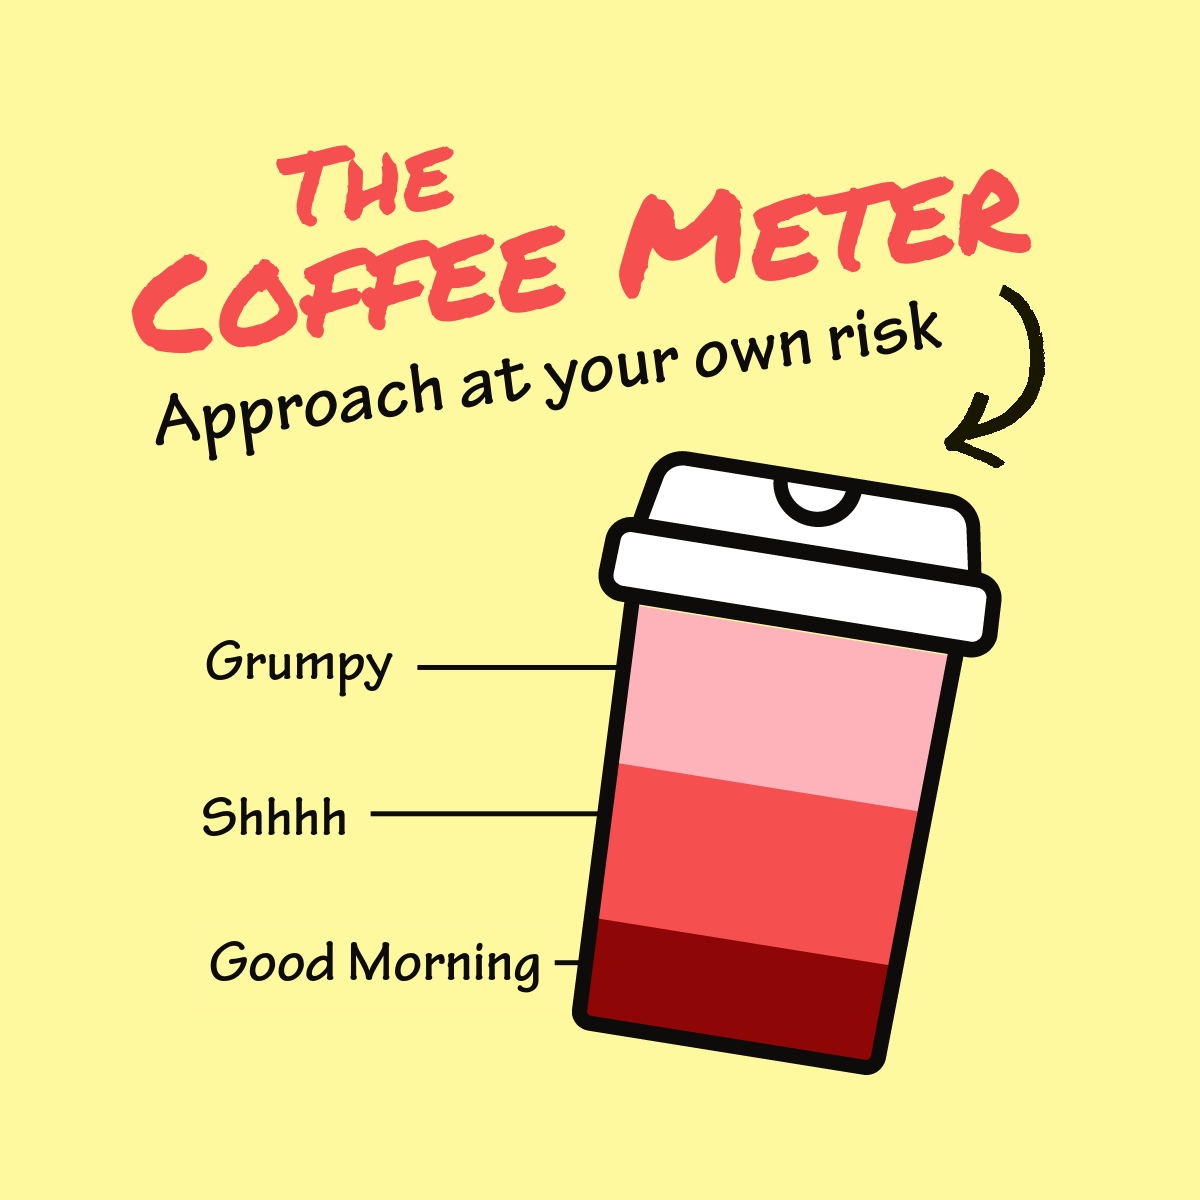 Coffee meter drawing shows levels of emotion based on amount consumed